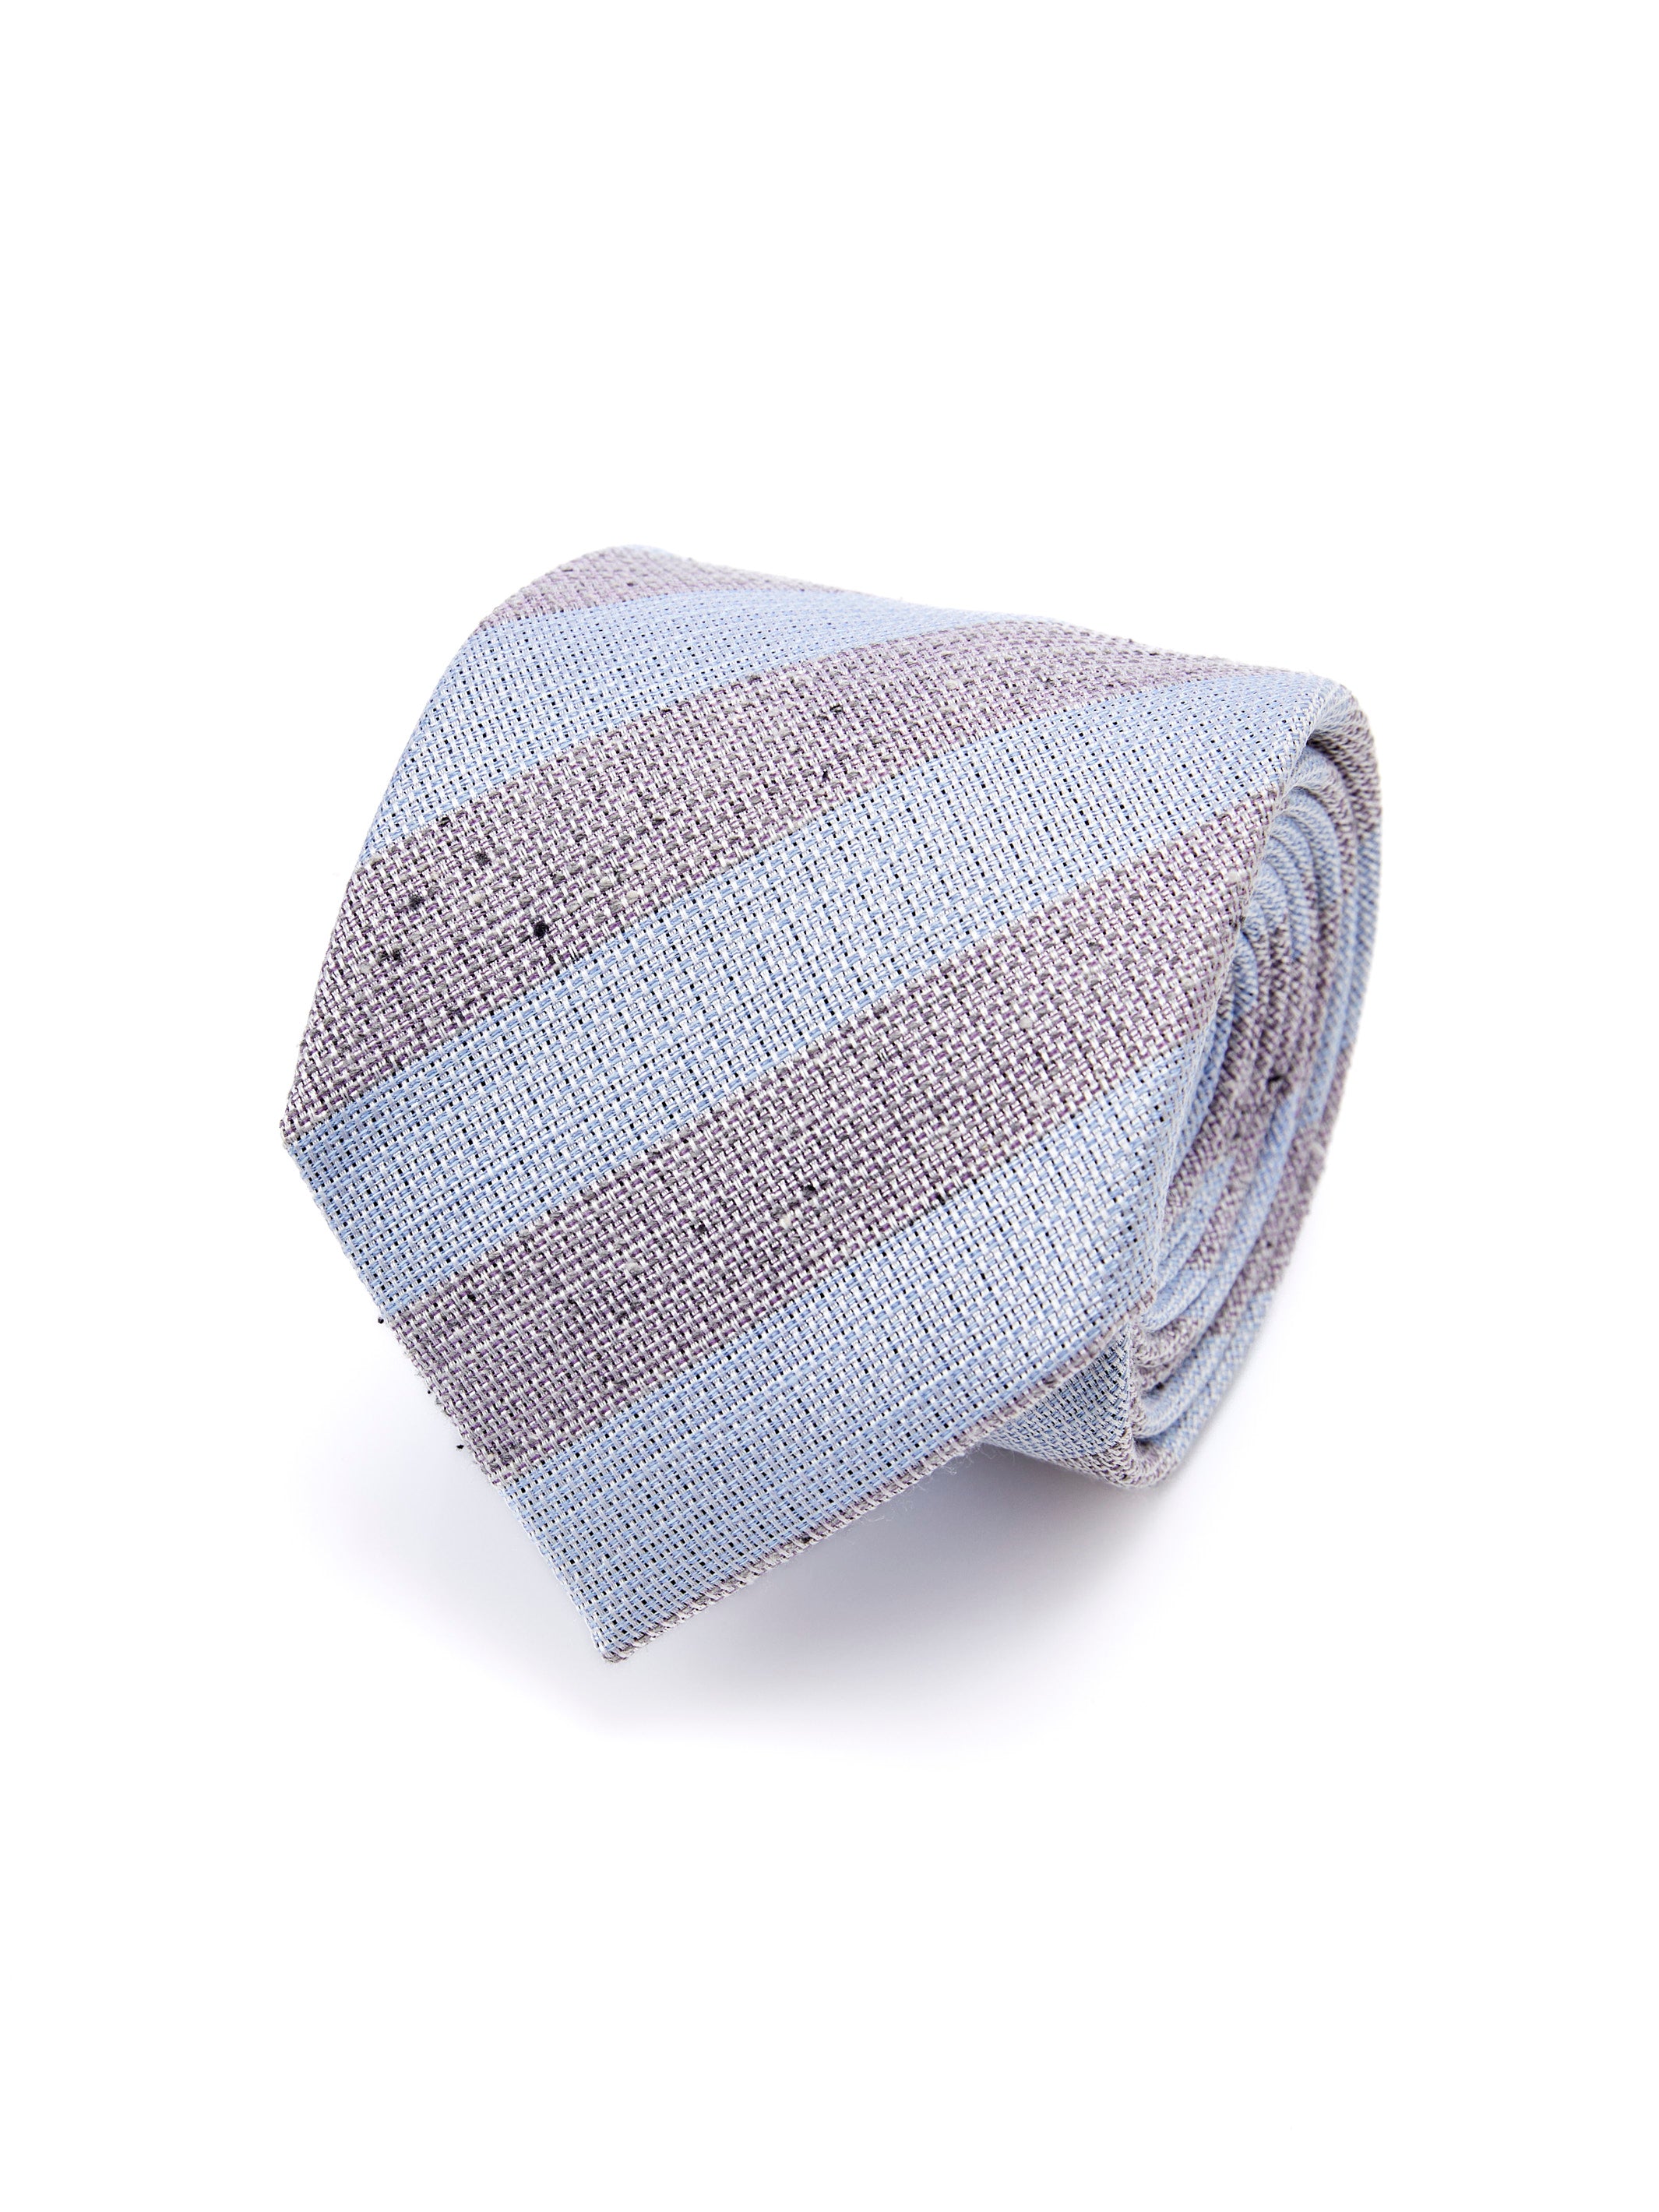 Silk tie with gray and blue stripes